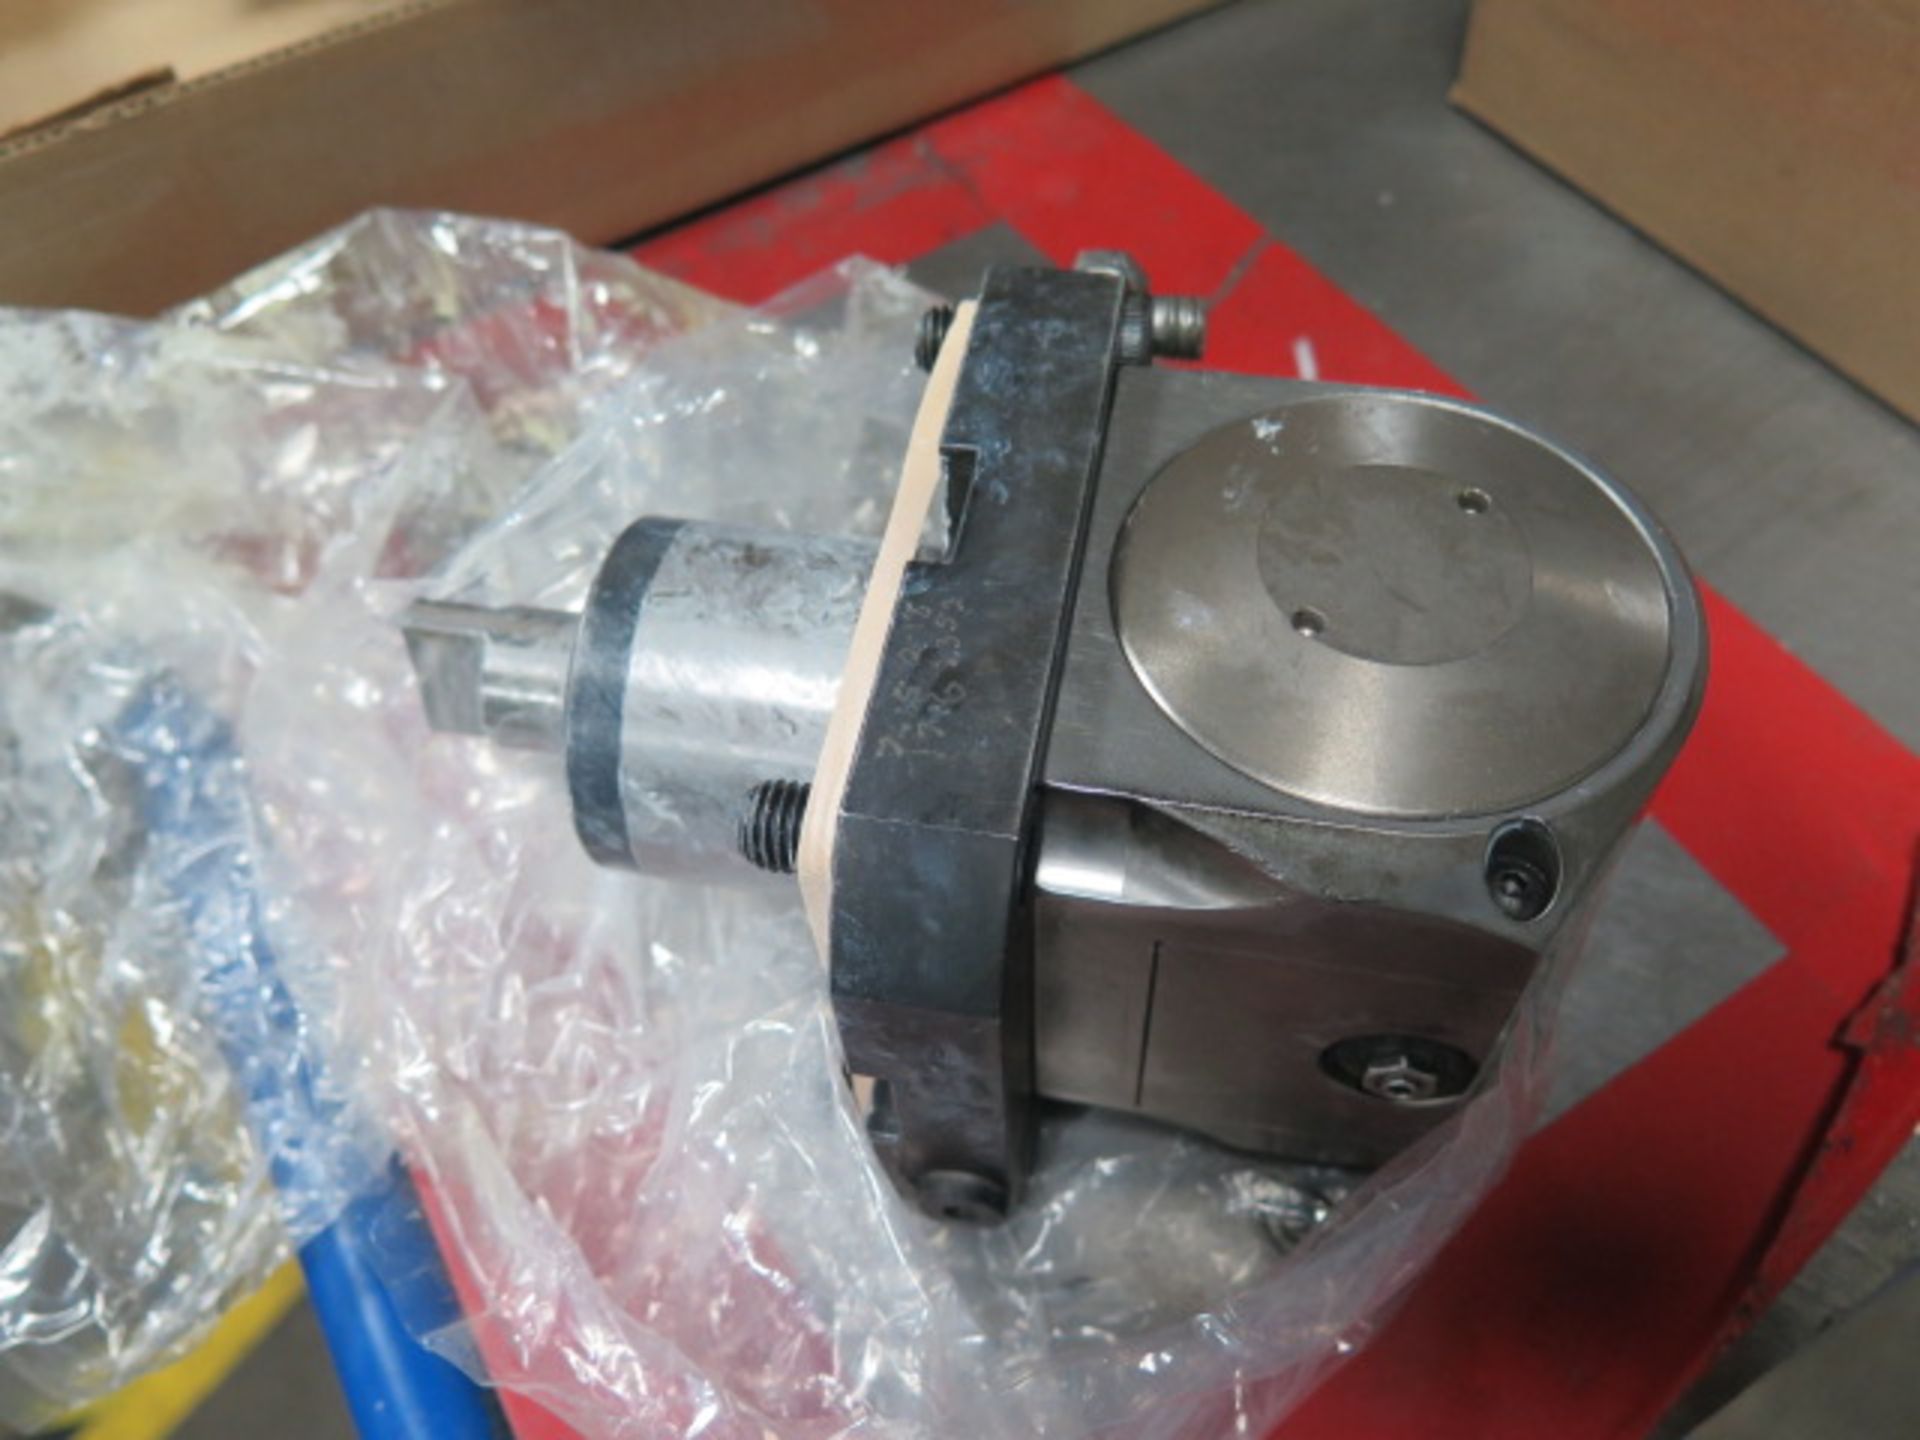 MD Adjustable Angle Rotary Drilling/Milling Head(SOLD AS-IS - NO WARRANTY) - Image 4 of 5